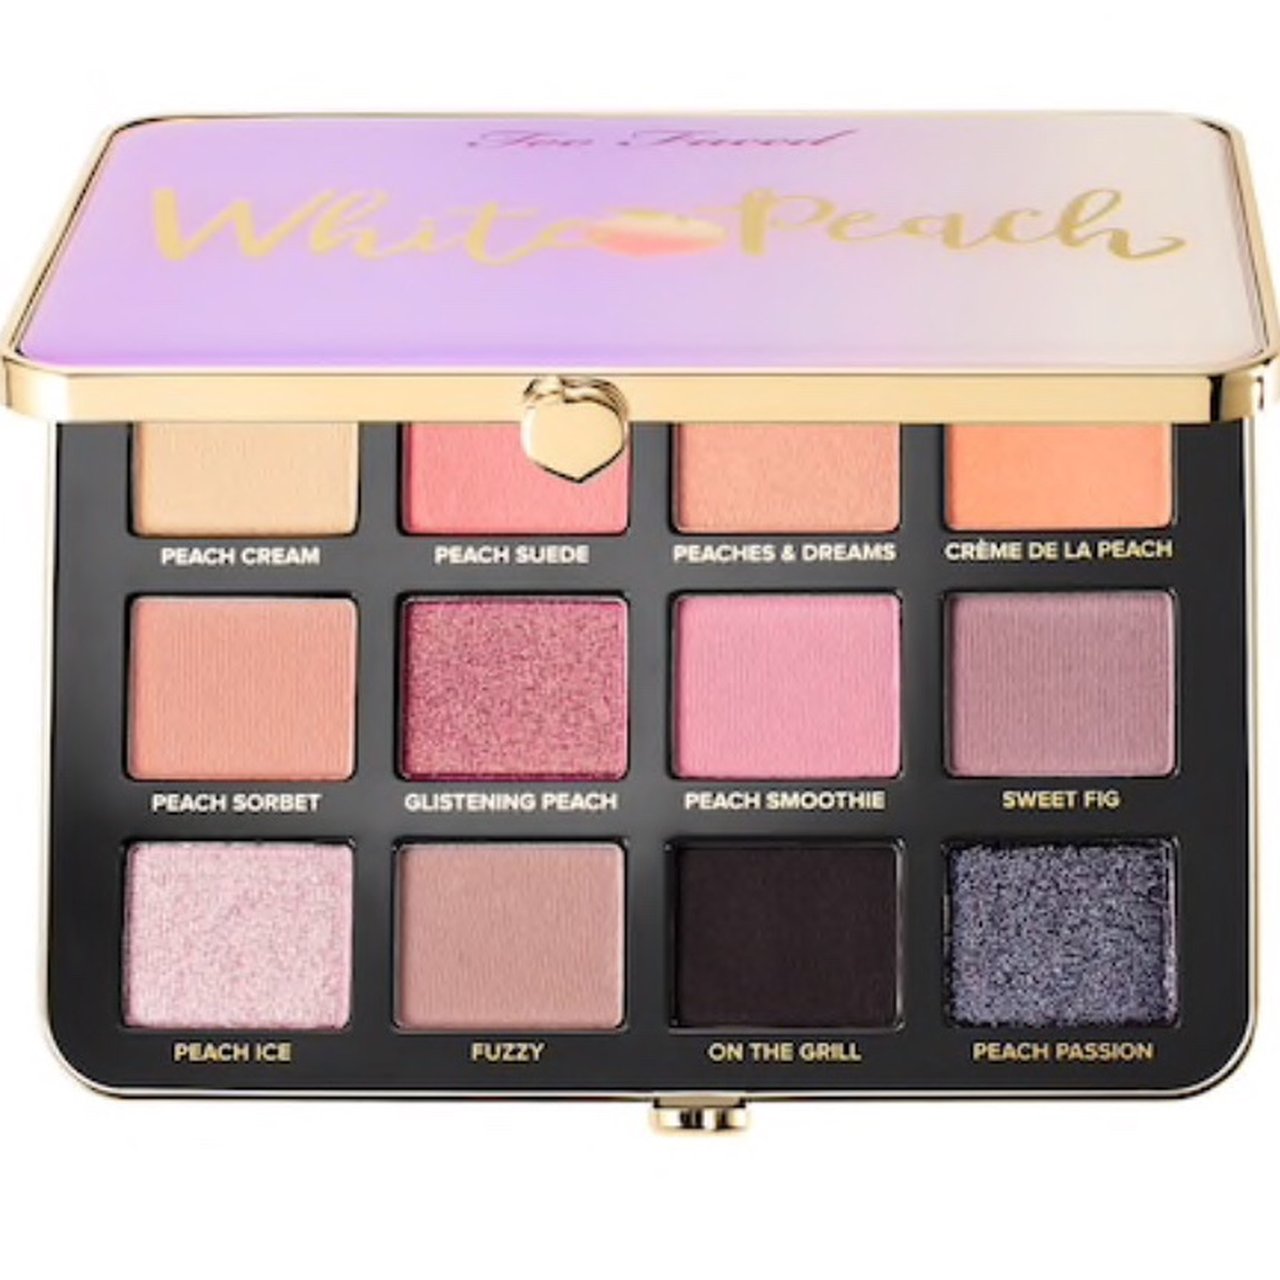 Toofaced11